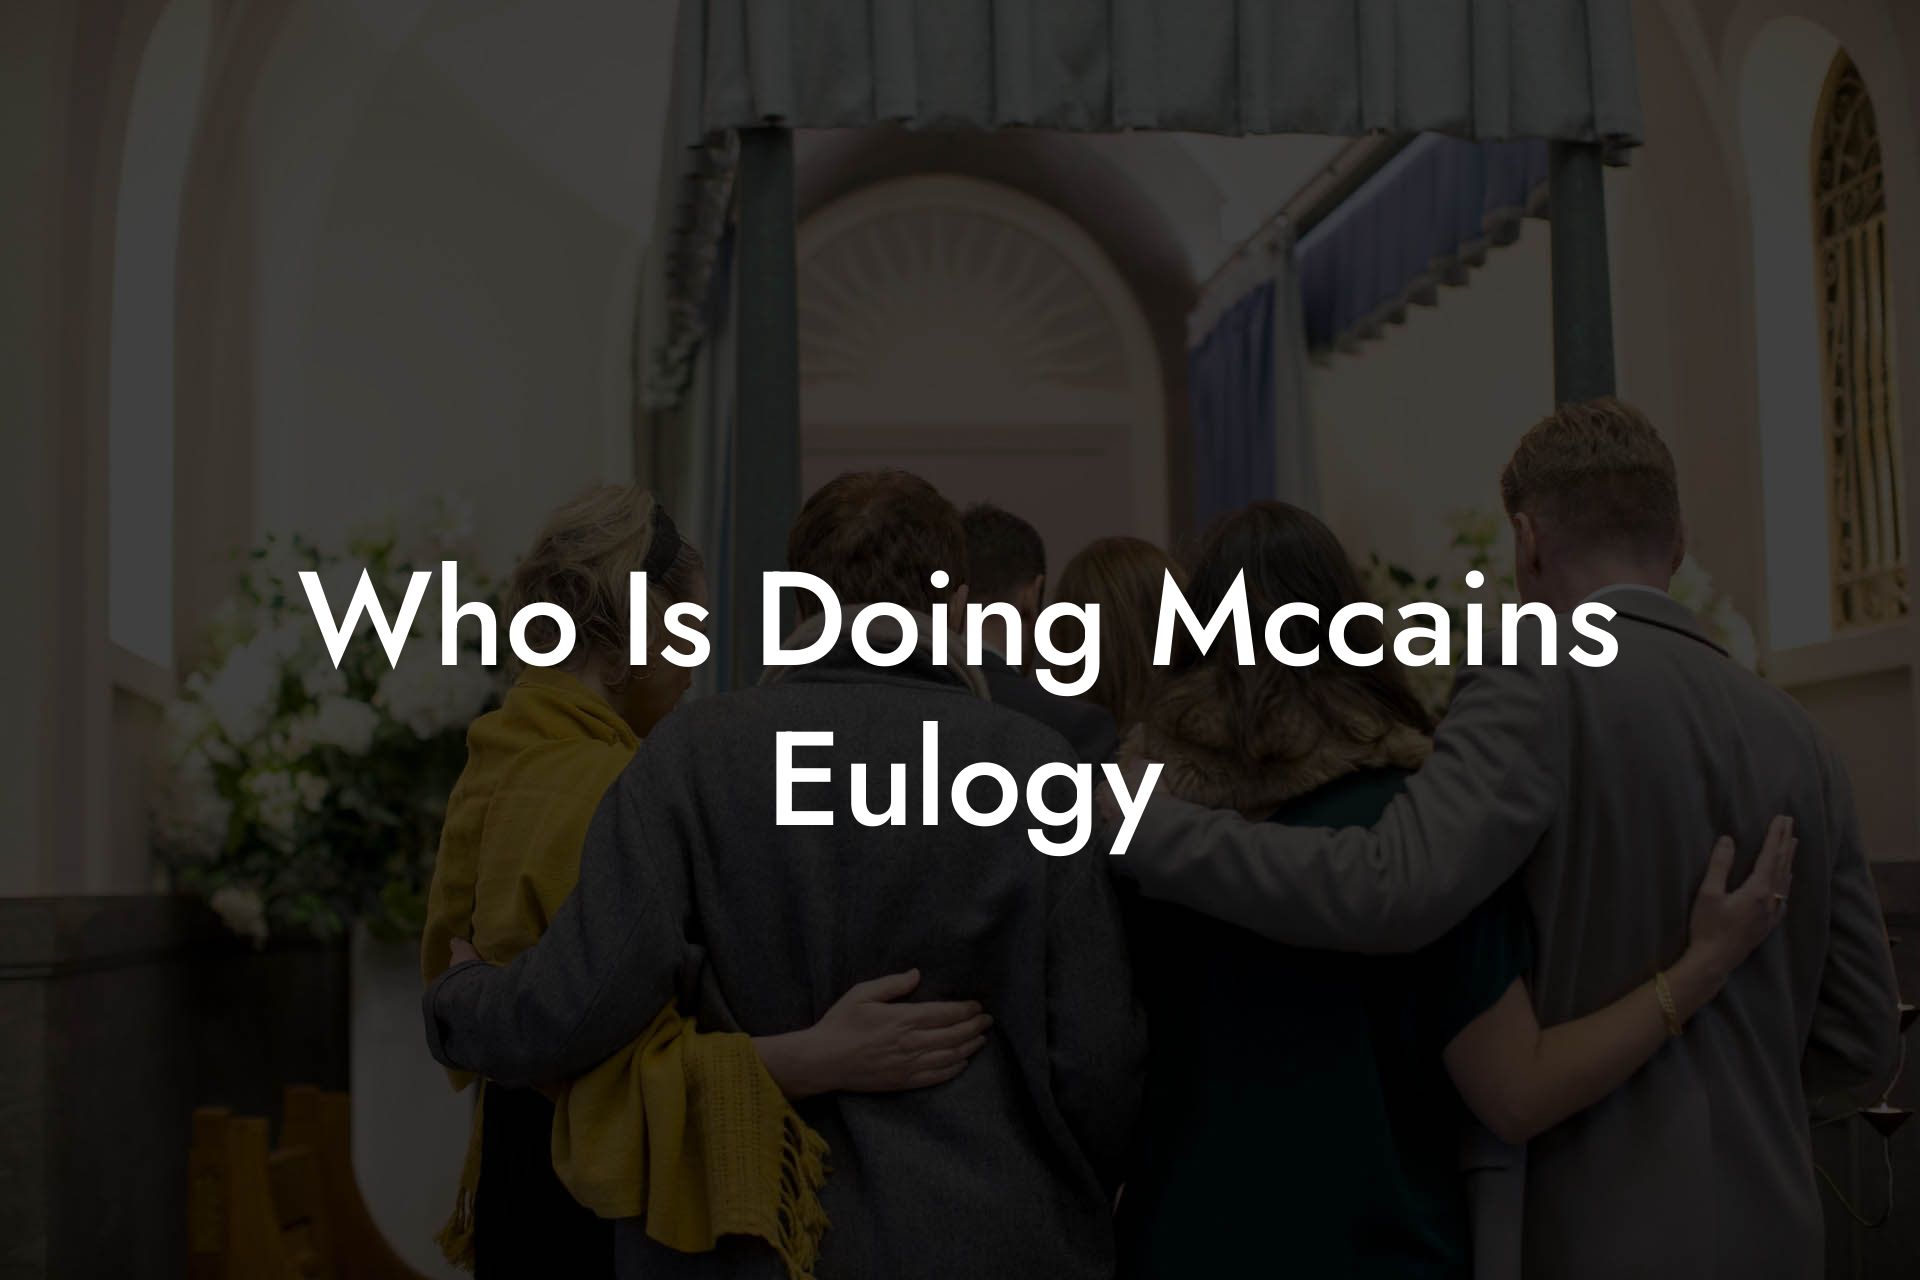 Who Is Doing Mccains Eulogy